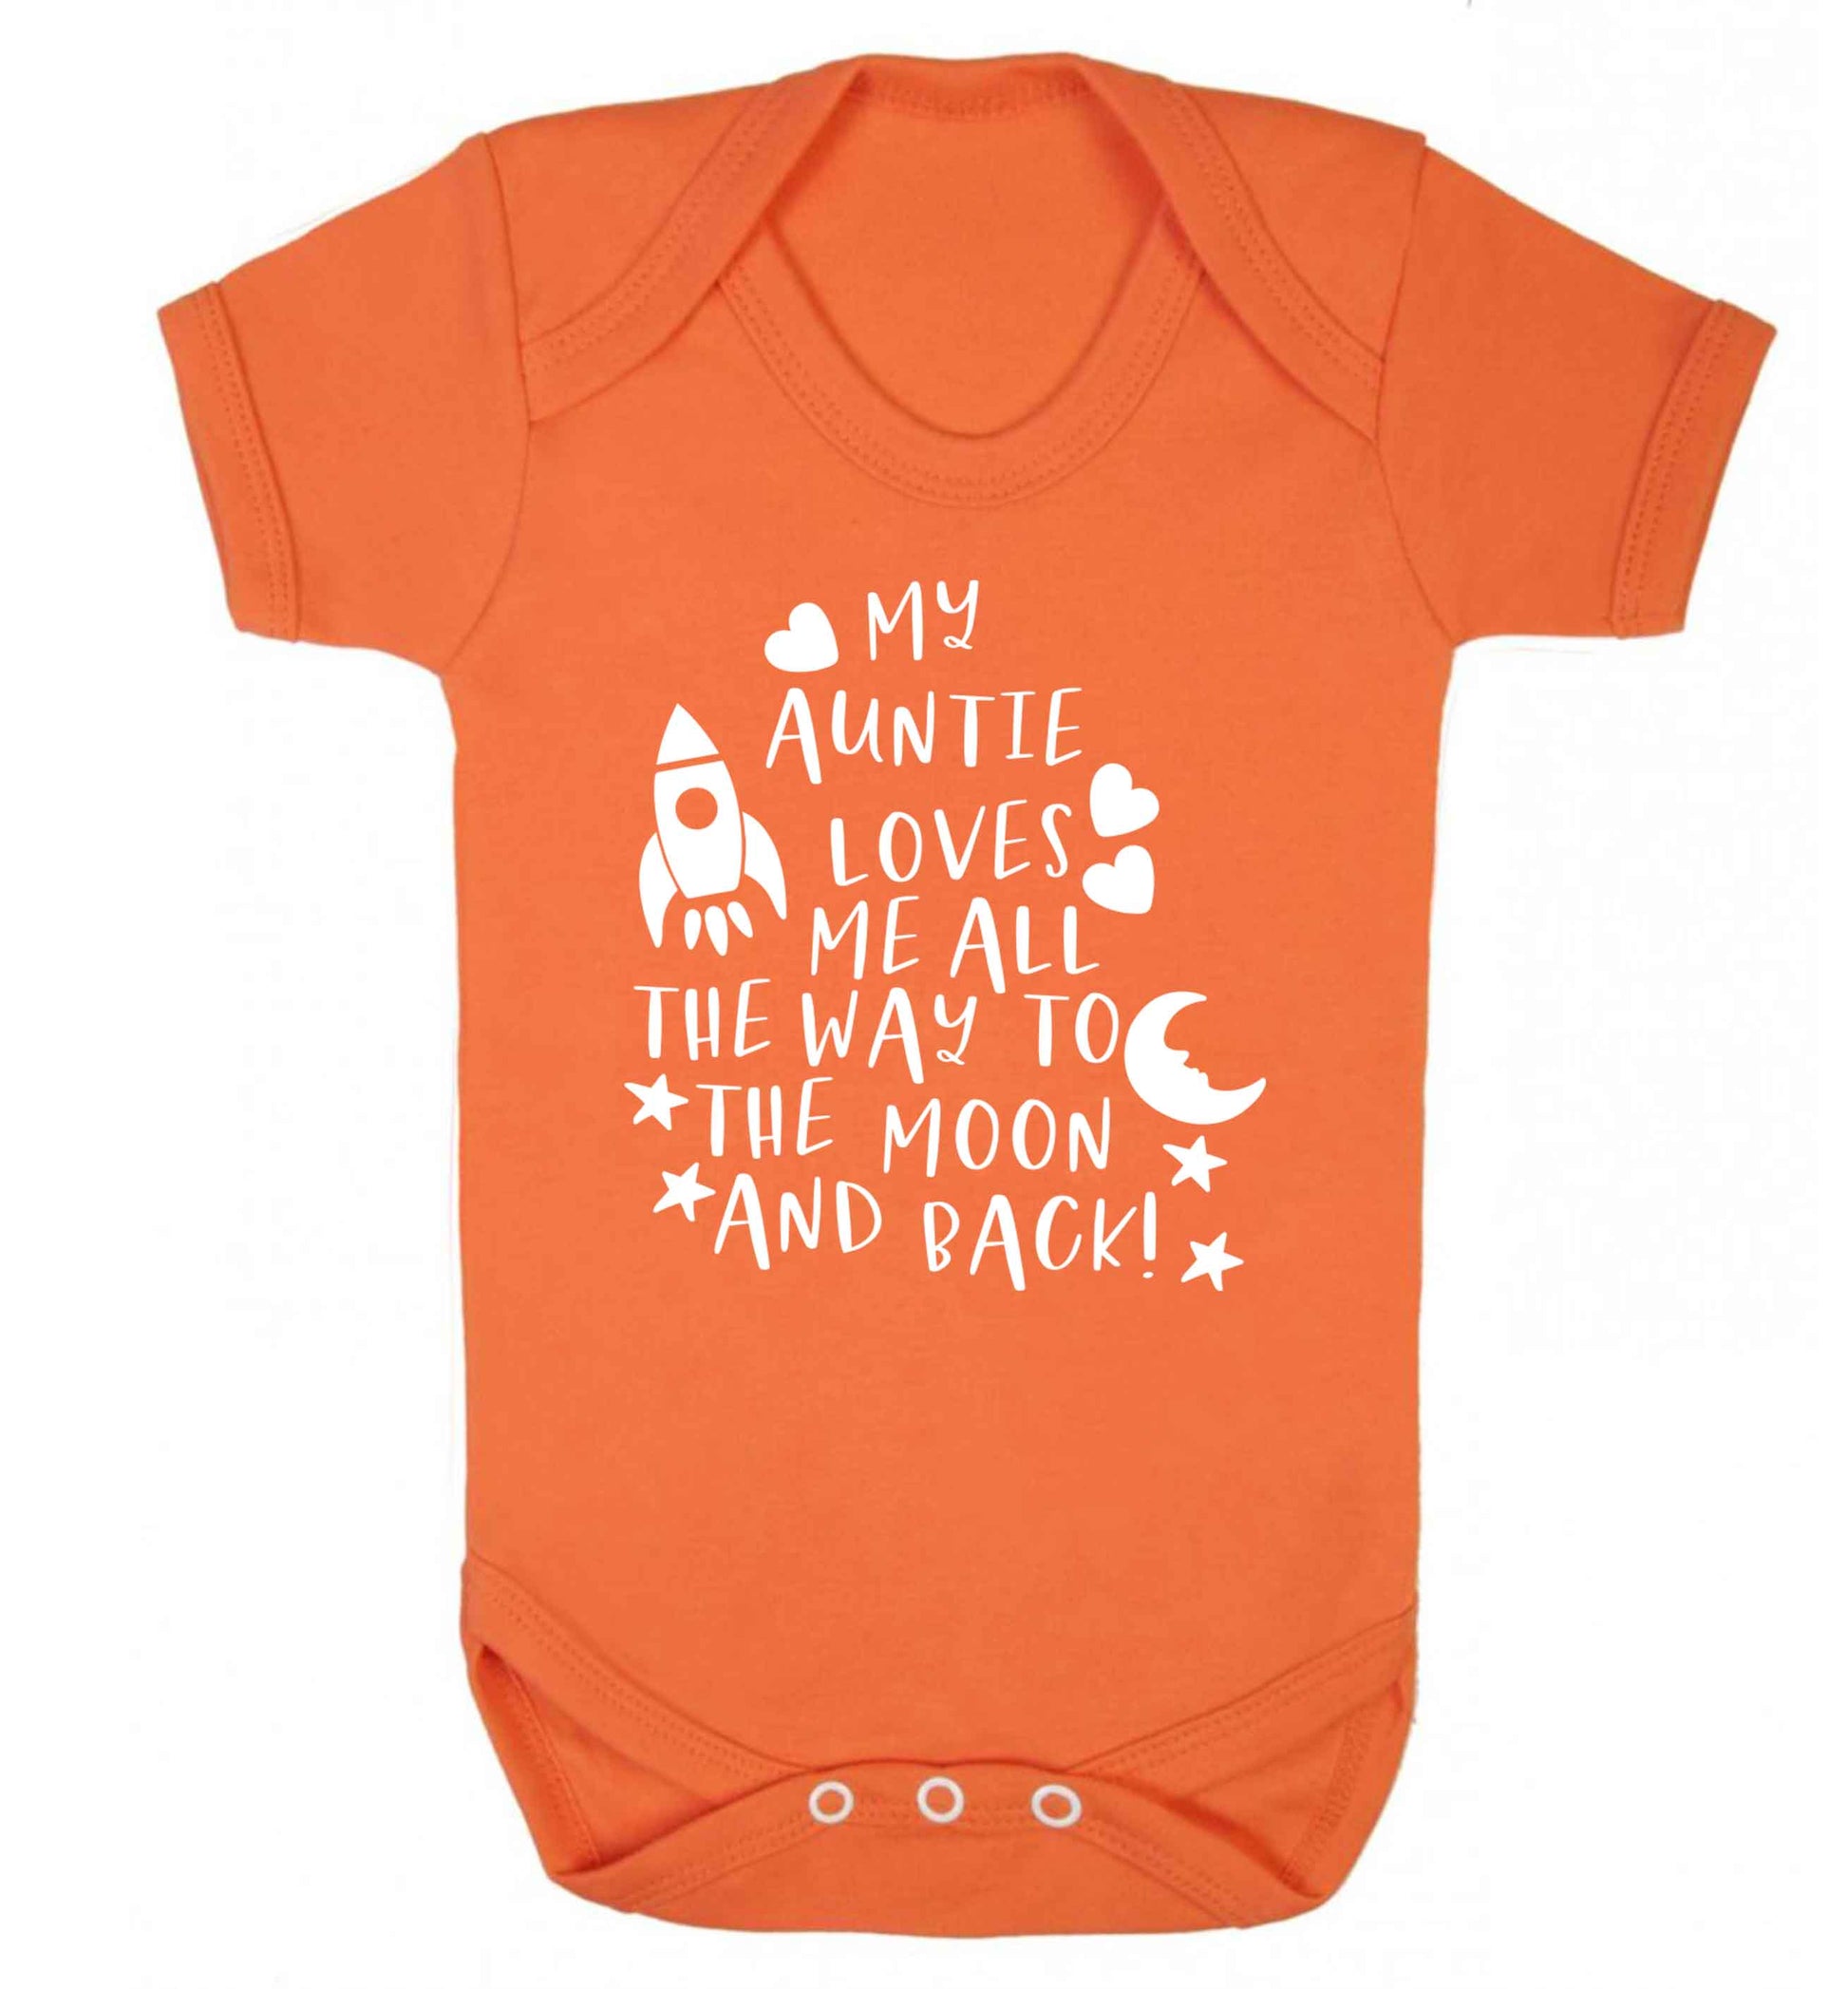 My auntie loves me all the way to the moon and back Baby Vest orange 18-24 months